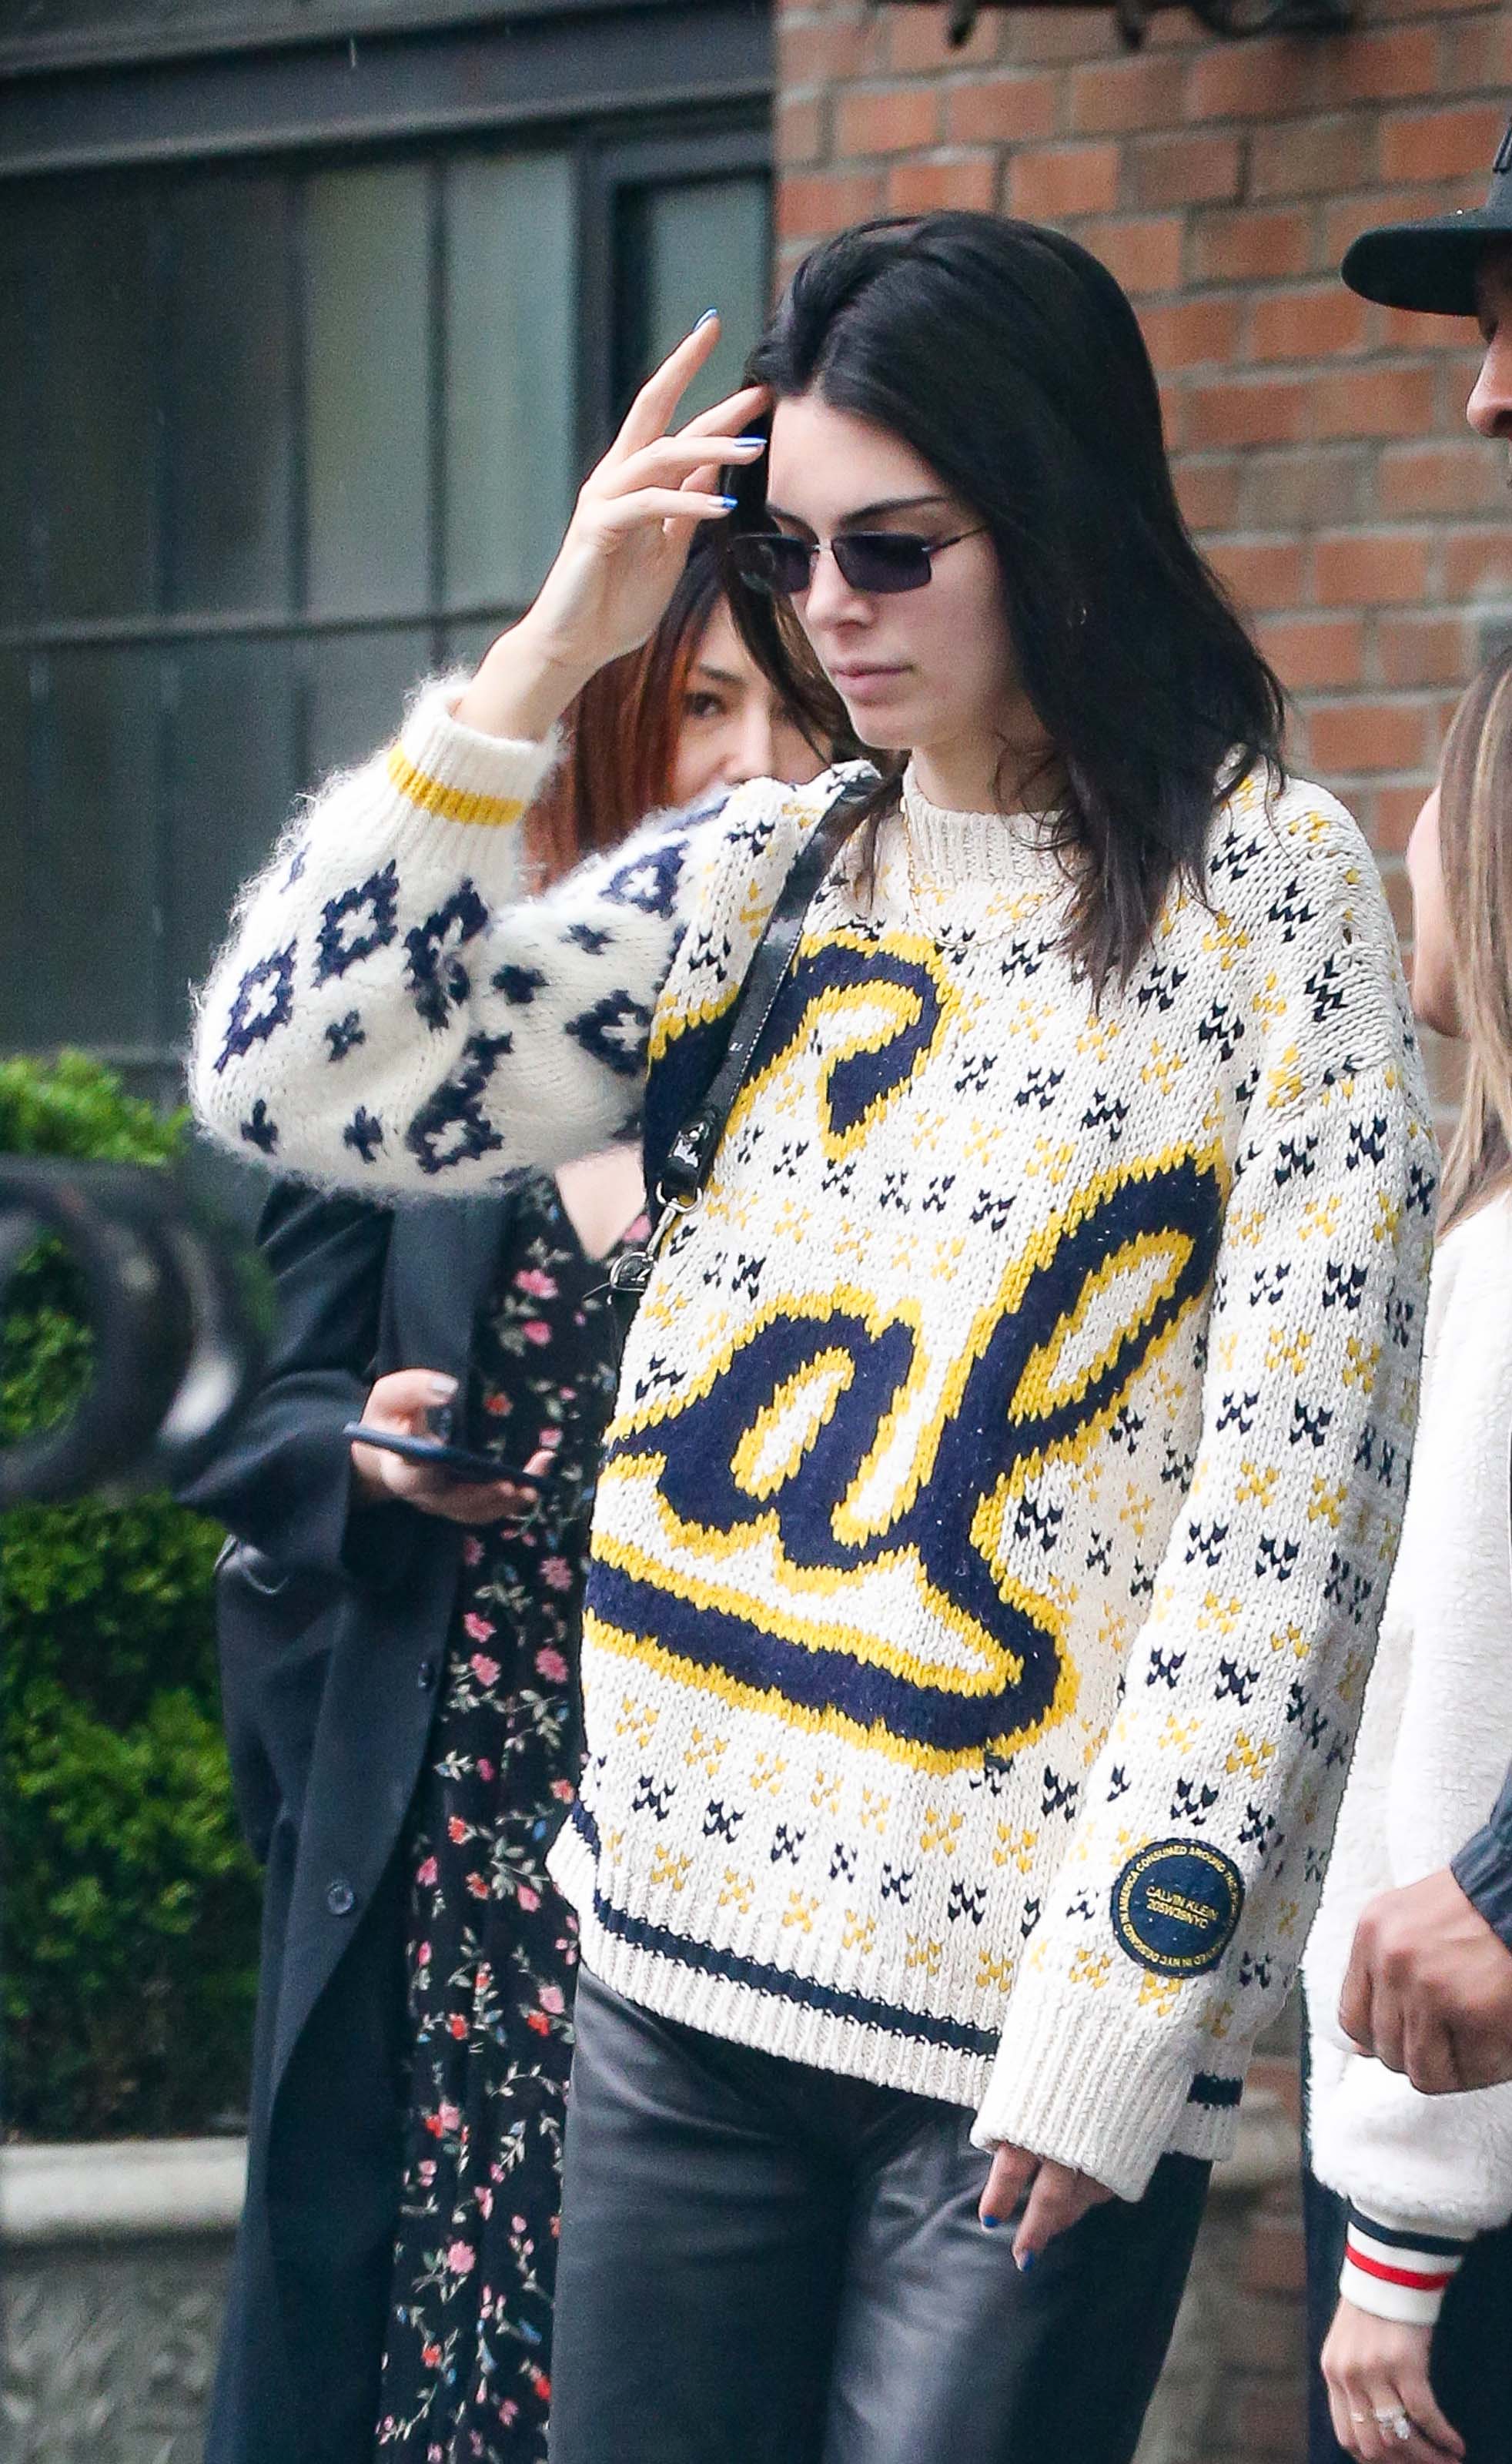 Kendall Jenner steps out in NYC